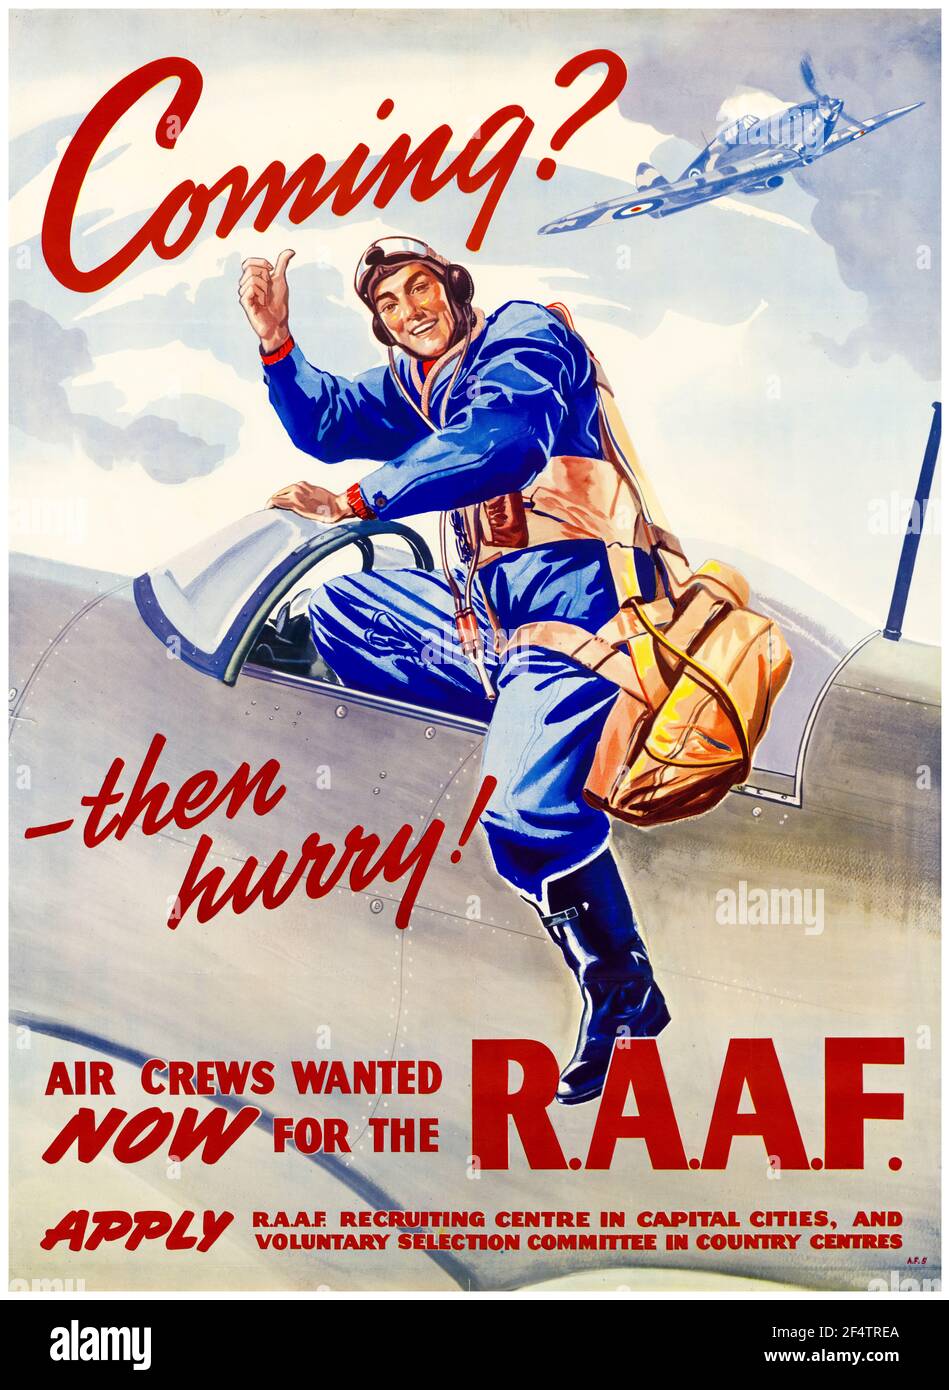 Australian, WW2 Forces Recruitment poster: Air Crews Wanted for RAAF (Royal Australian Air Force), 1942-1945 Stock Photo